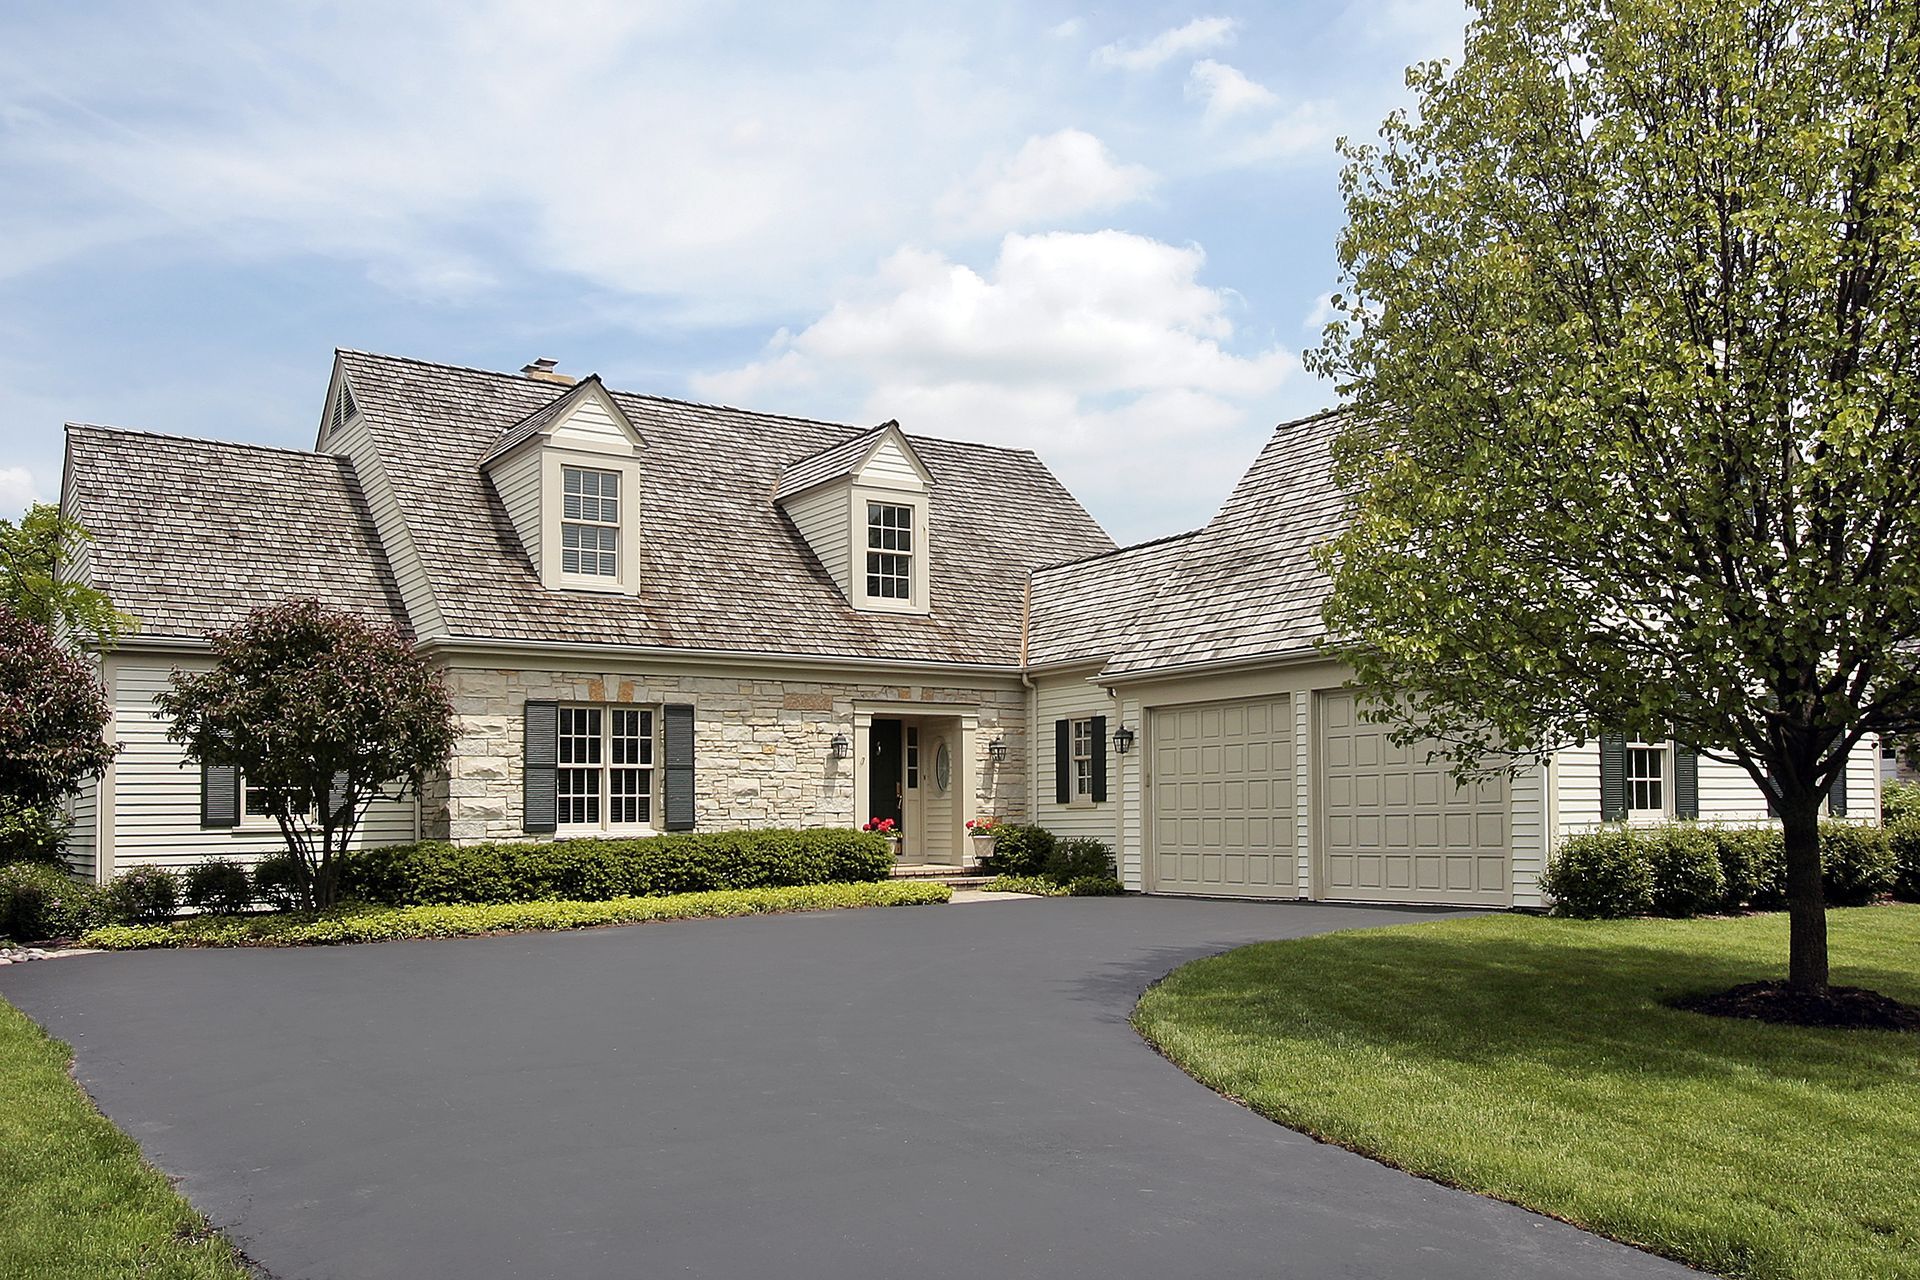 Picture of a house and connected garage with cedar shake roofing